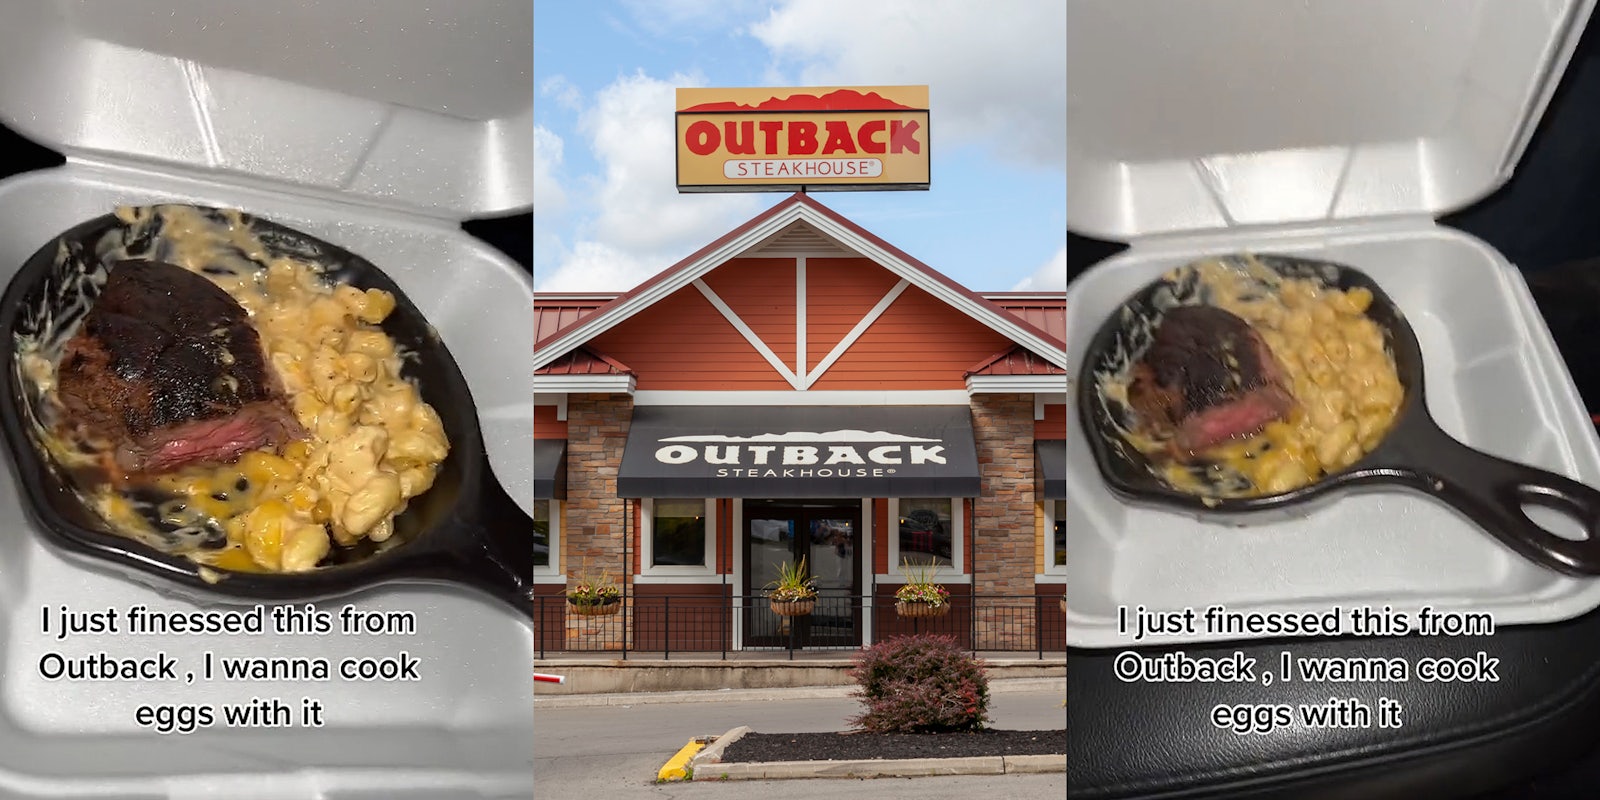 Outback Steakhouse food in pan in white take out container caption 'I just finessed this from Outback, I wanna cook eggs with it' (l) Outback Steakhouse building with sign (c) Outback Steakhouse food in pan in white take out container caption 'I just finessed this from Outback, I wanna cook eggs with it' (r)